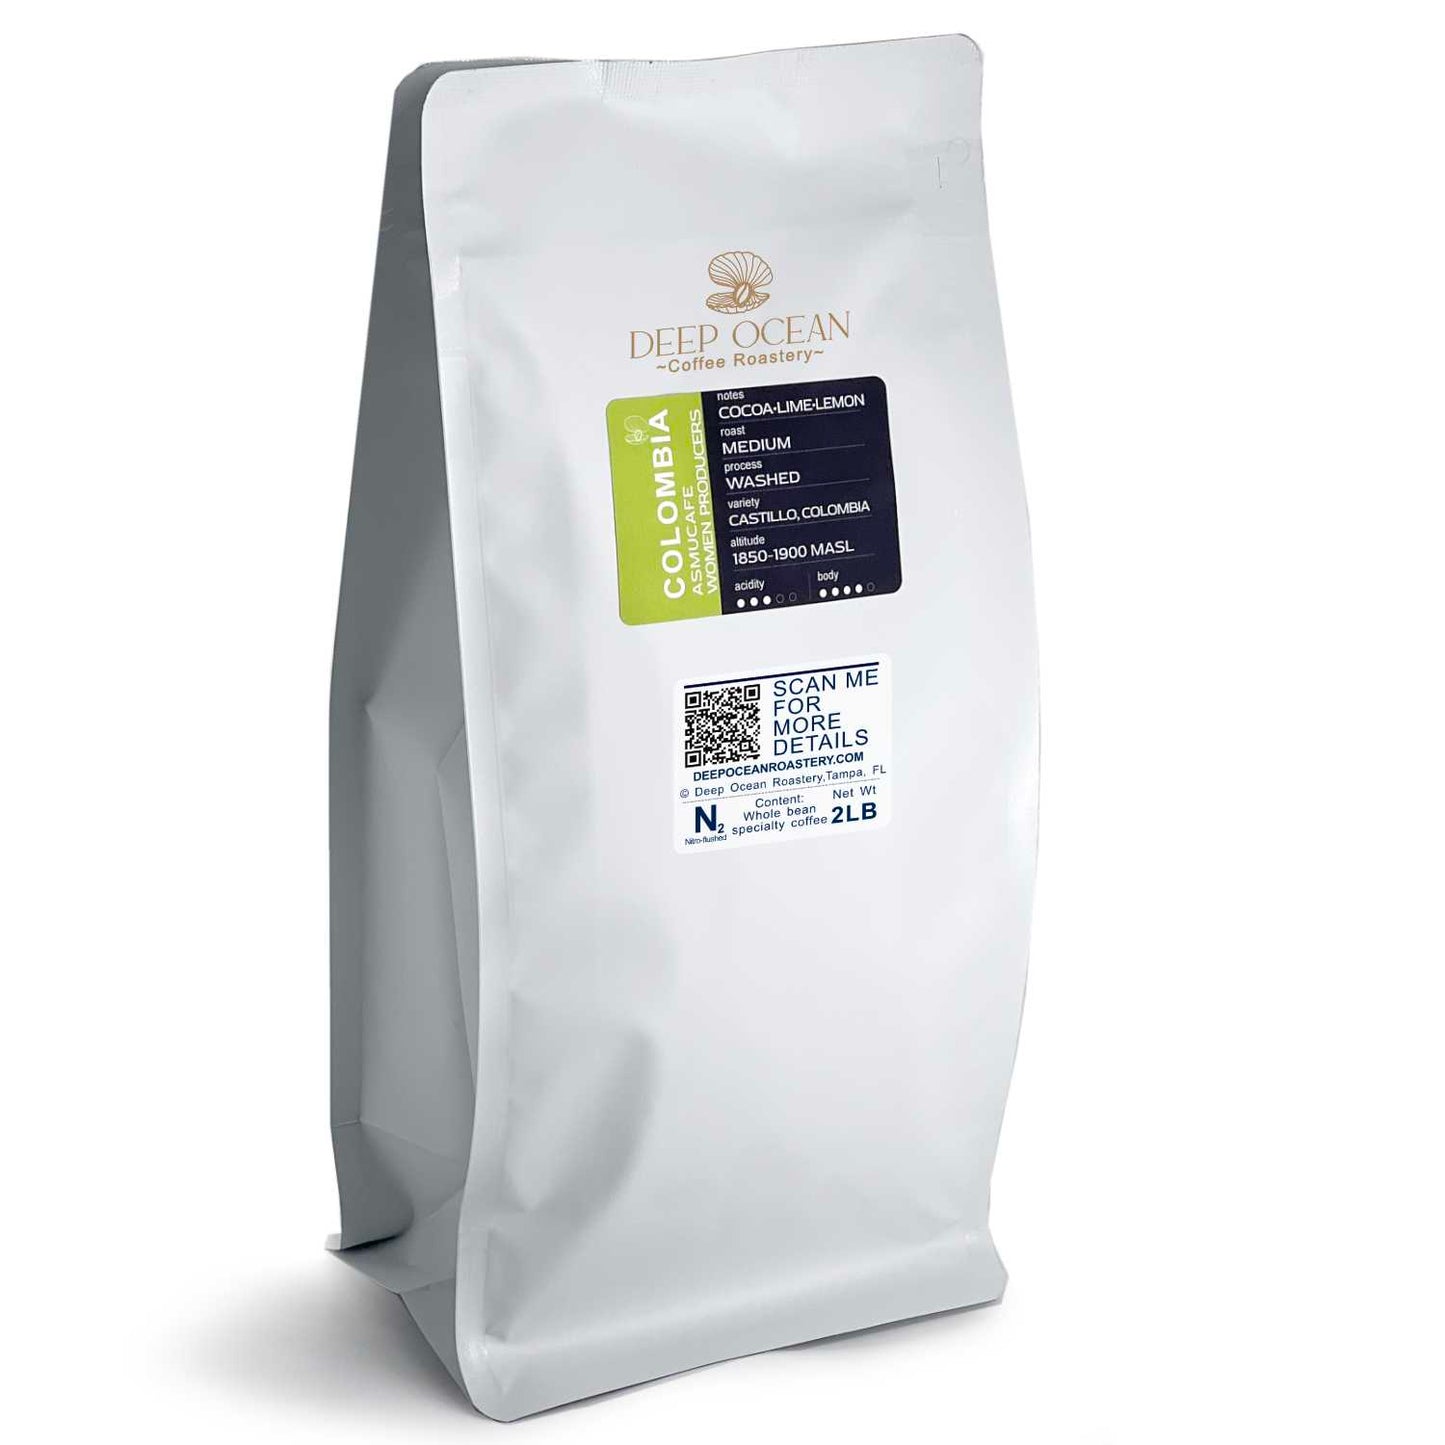 variant 4 - medium roasted coffee Colombia is great choice of specialty coffee.